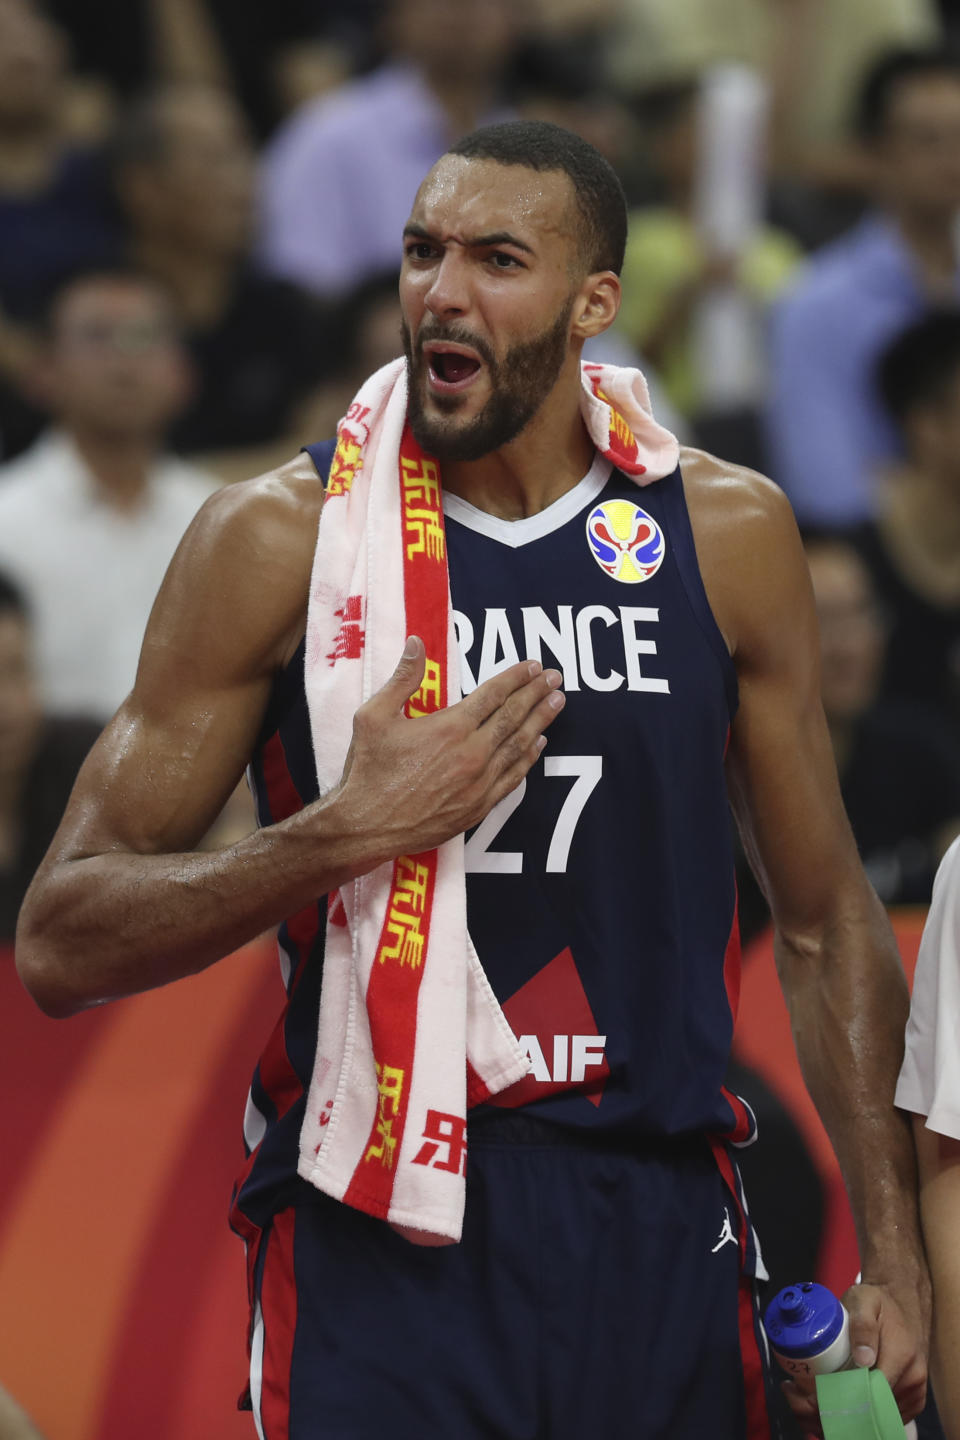 France's Rudy Gobert reacts during a quarterfinal match against United States for the FIBA Basketball World Cup in Dongguan in southern China's Guangdong province on Wednesday, Sept. 11, 2019. France defeated United States 89-79. (AP Photo/Ng Han Guan)